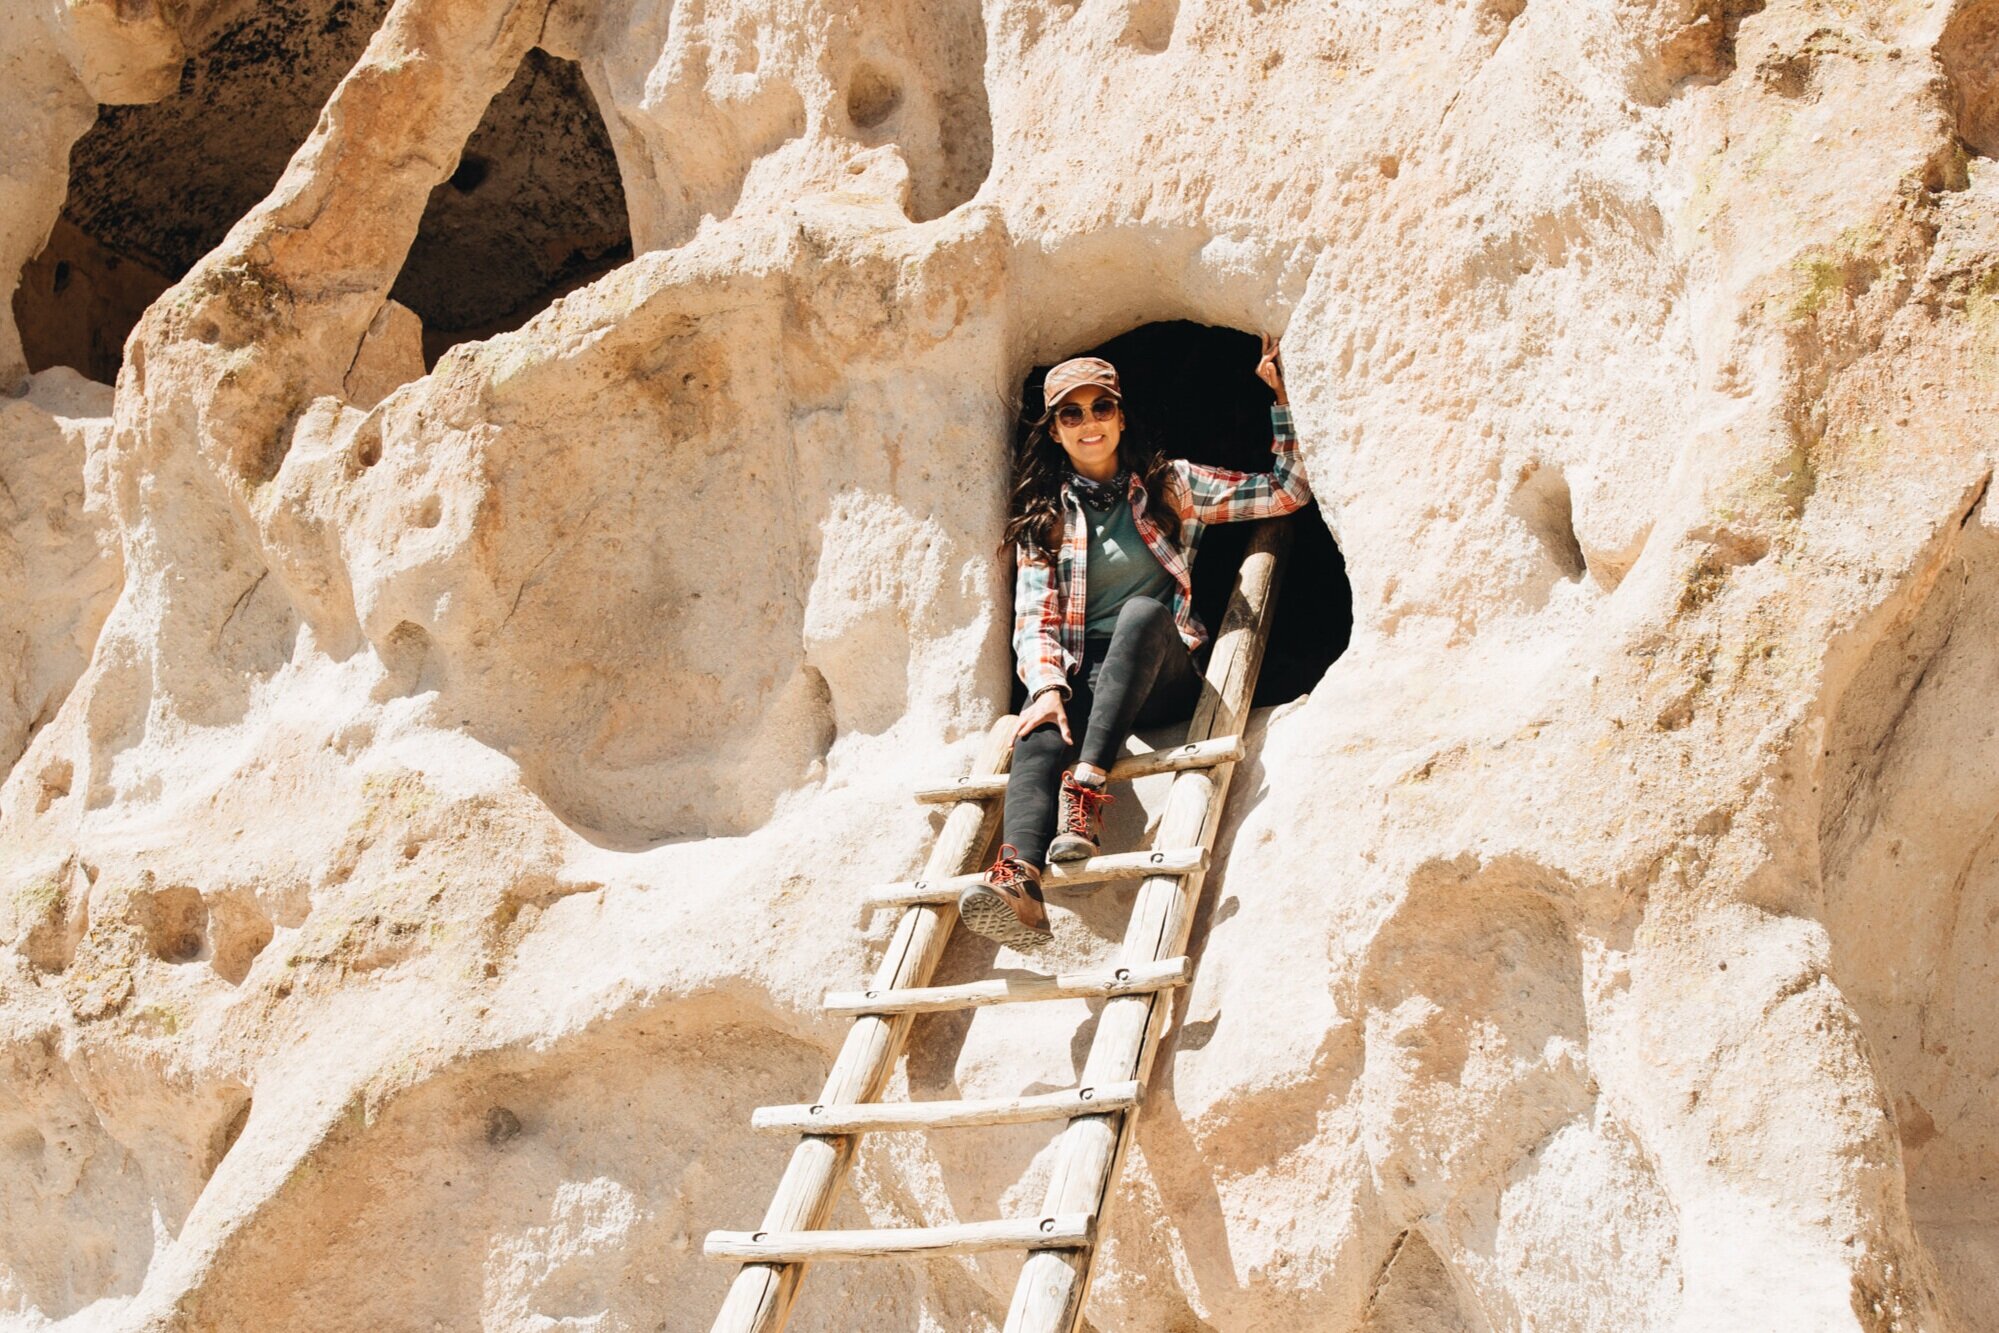 Hike the Pueblo Loop Trail to the Alcove House Trail in Bandelier National Monument